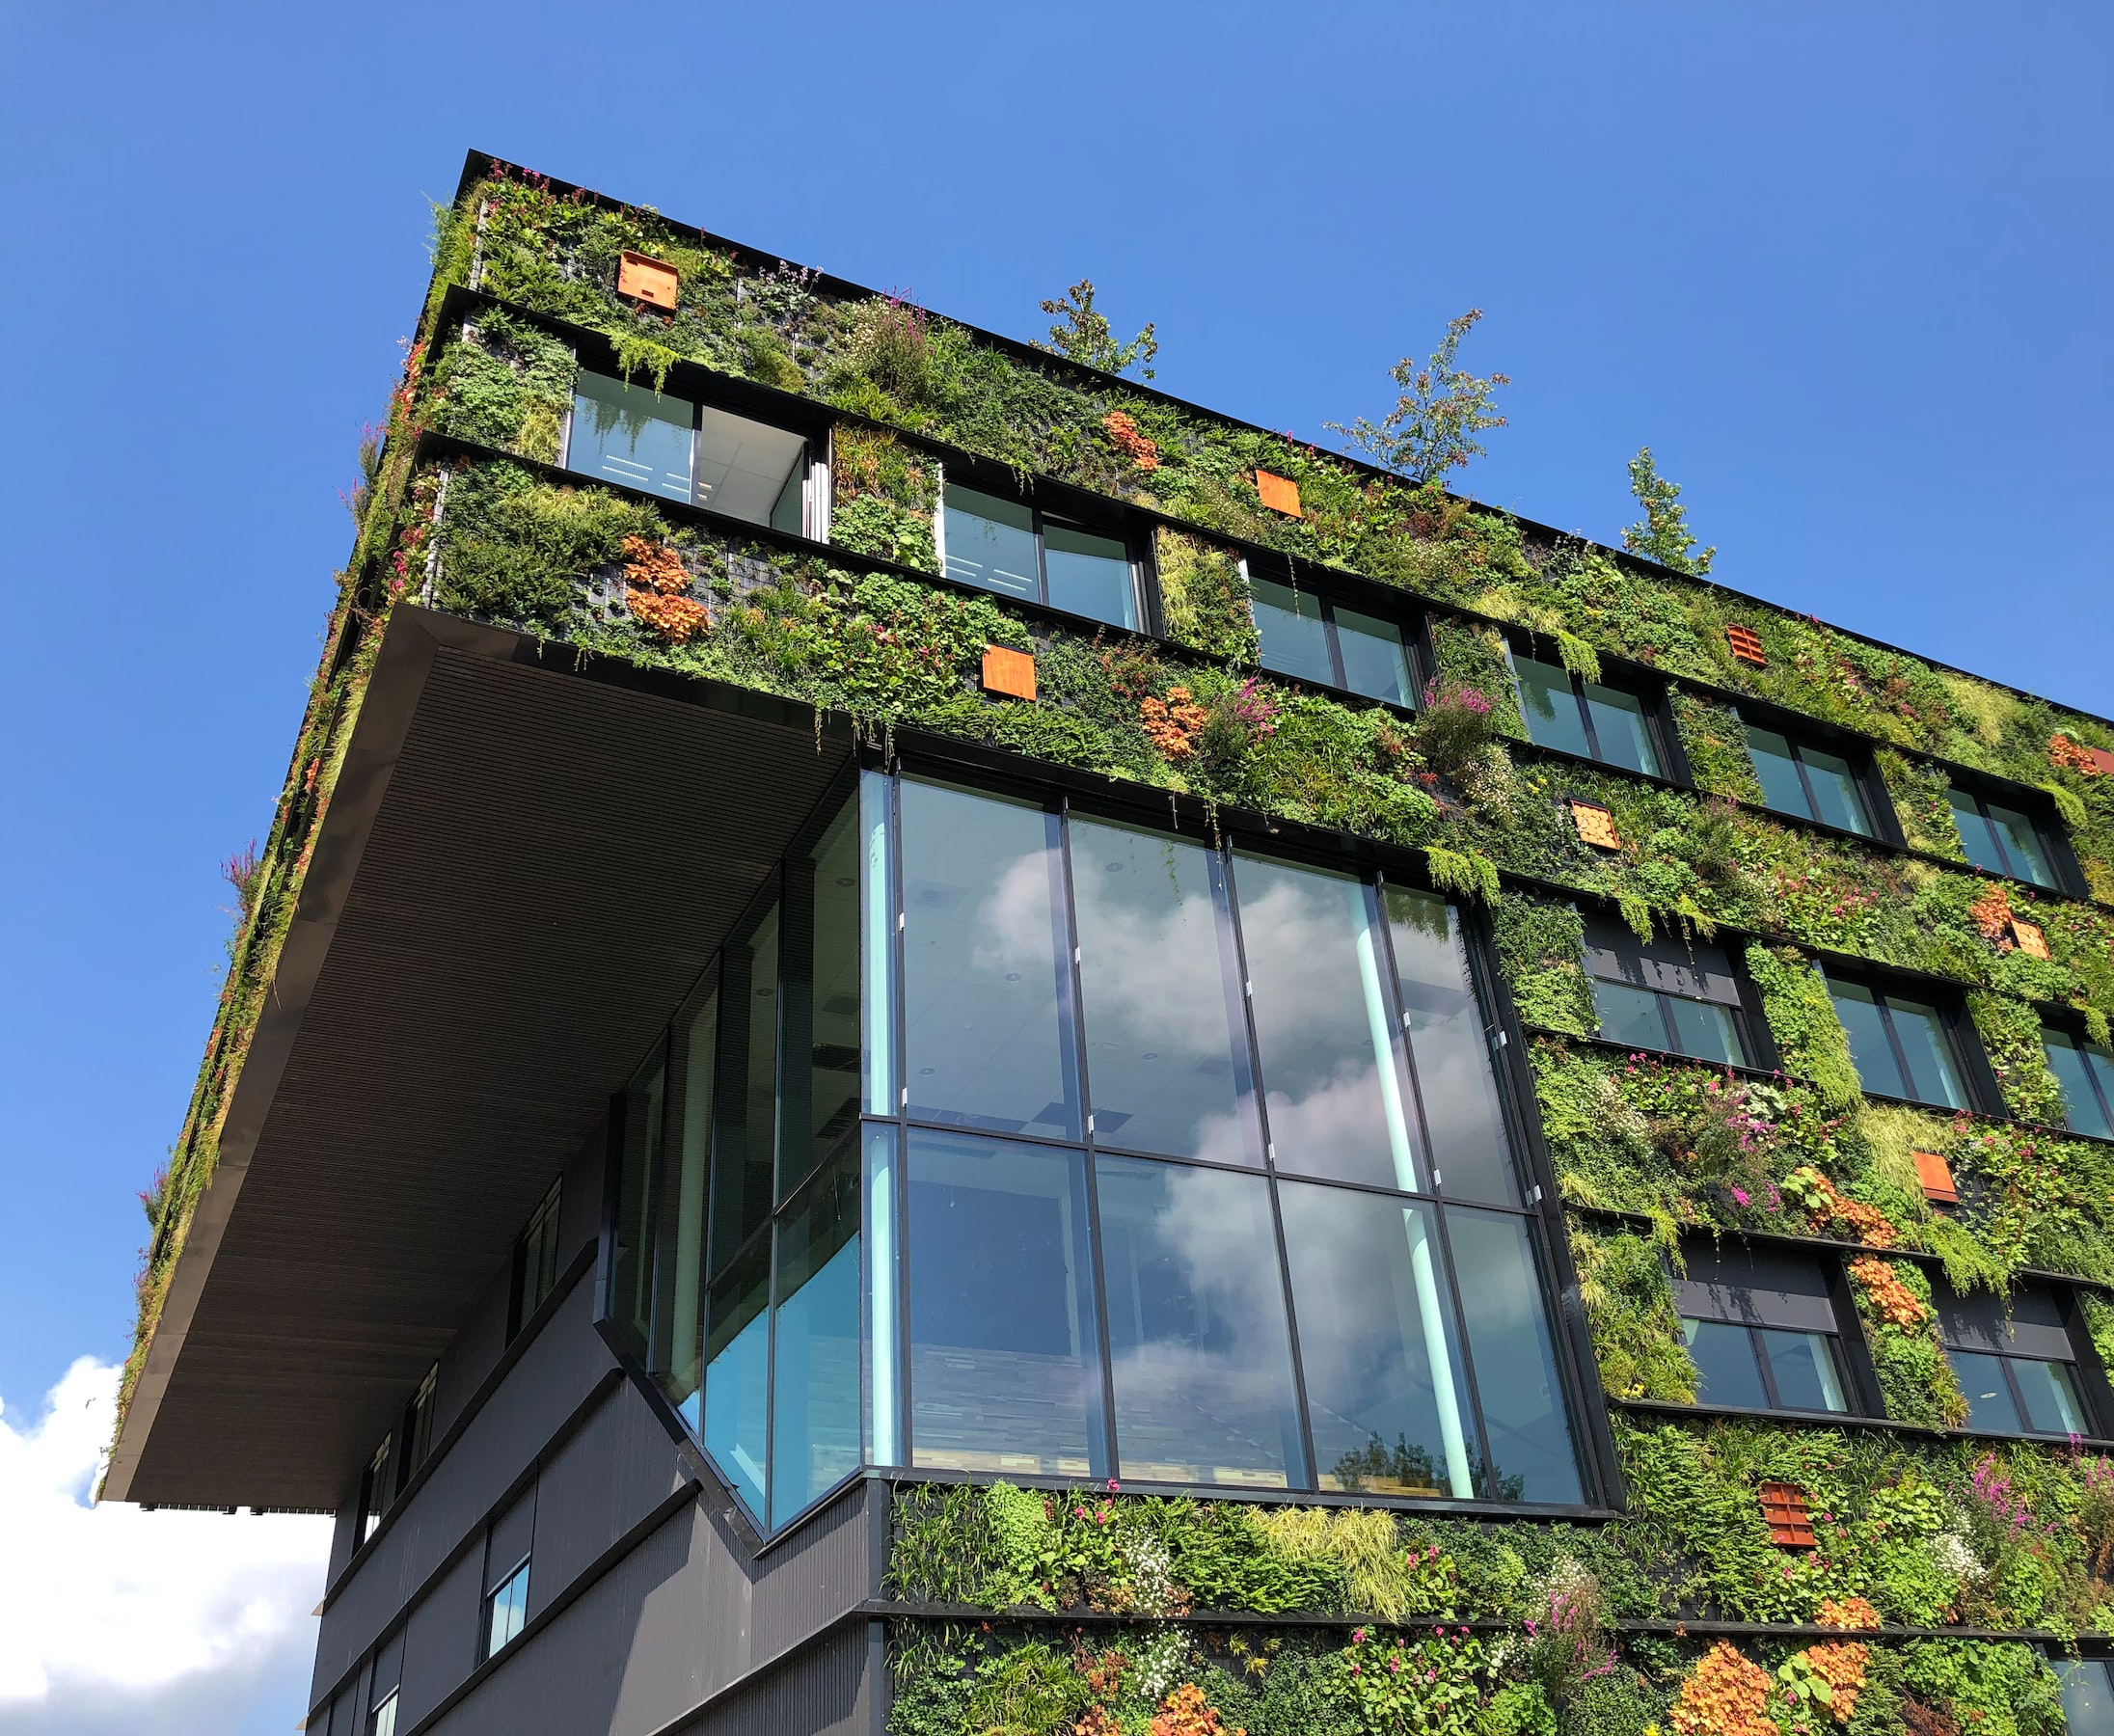 The exterior of a building planted with various plants